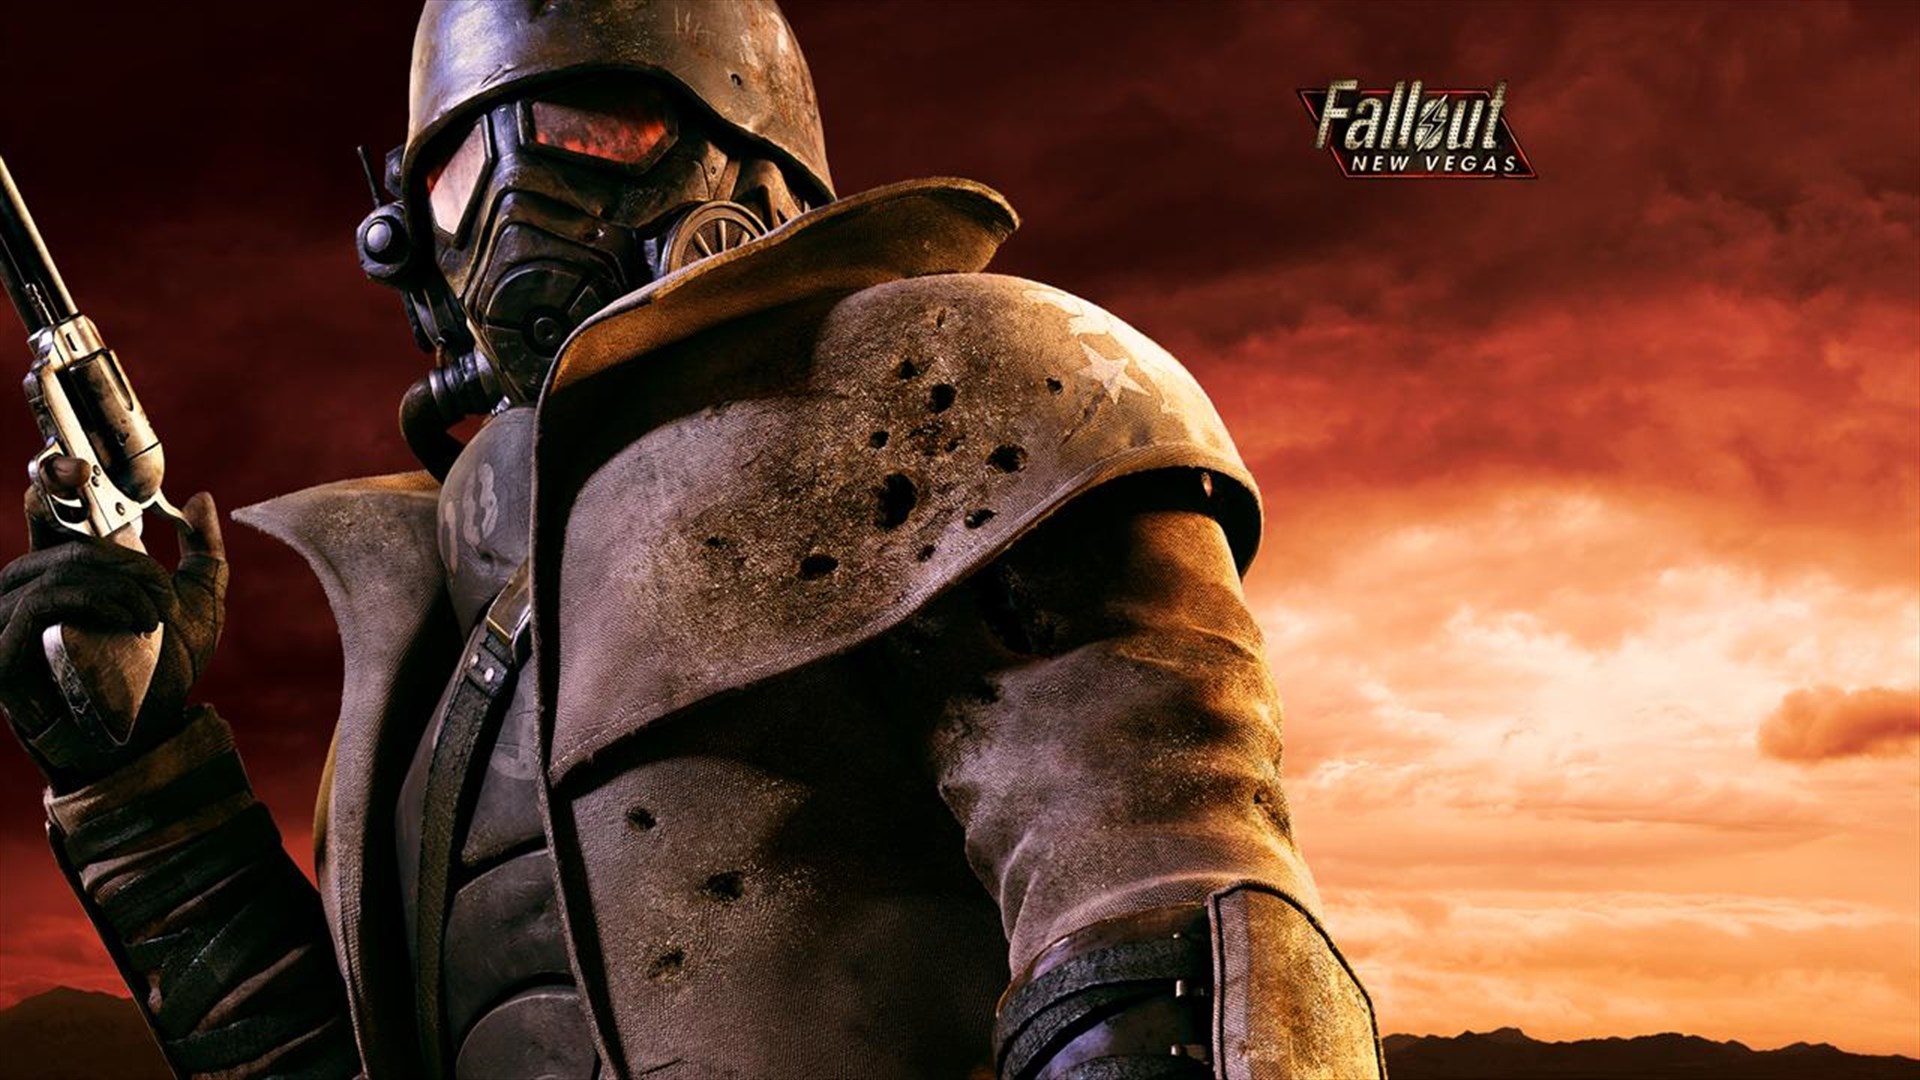 fallout new vegas ps4 price